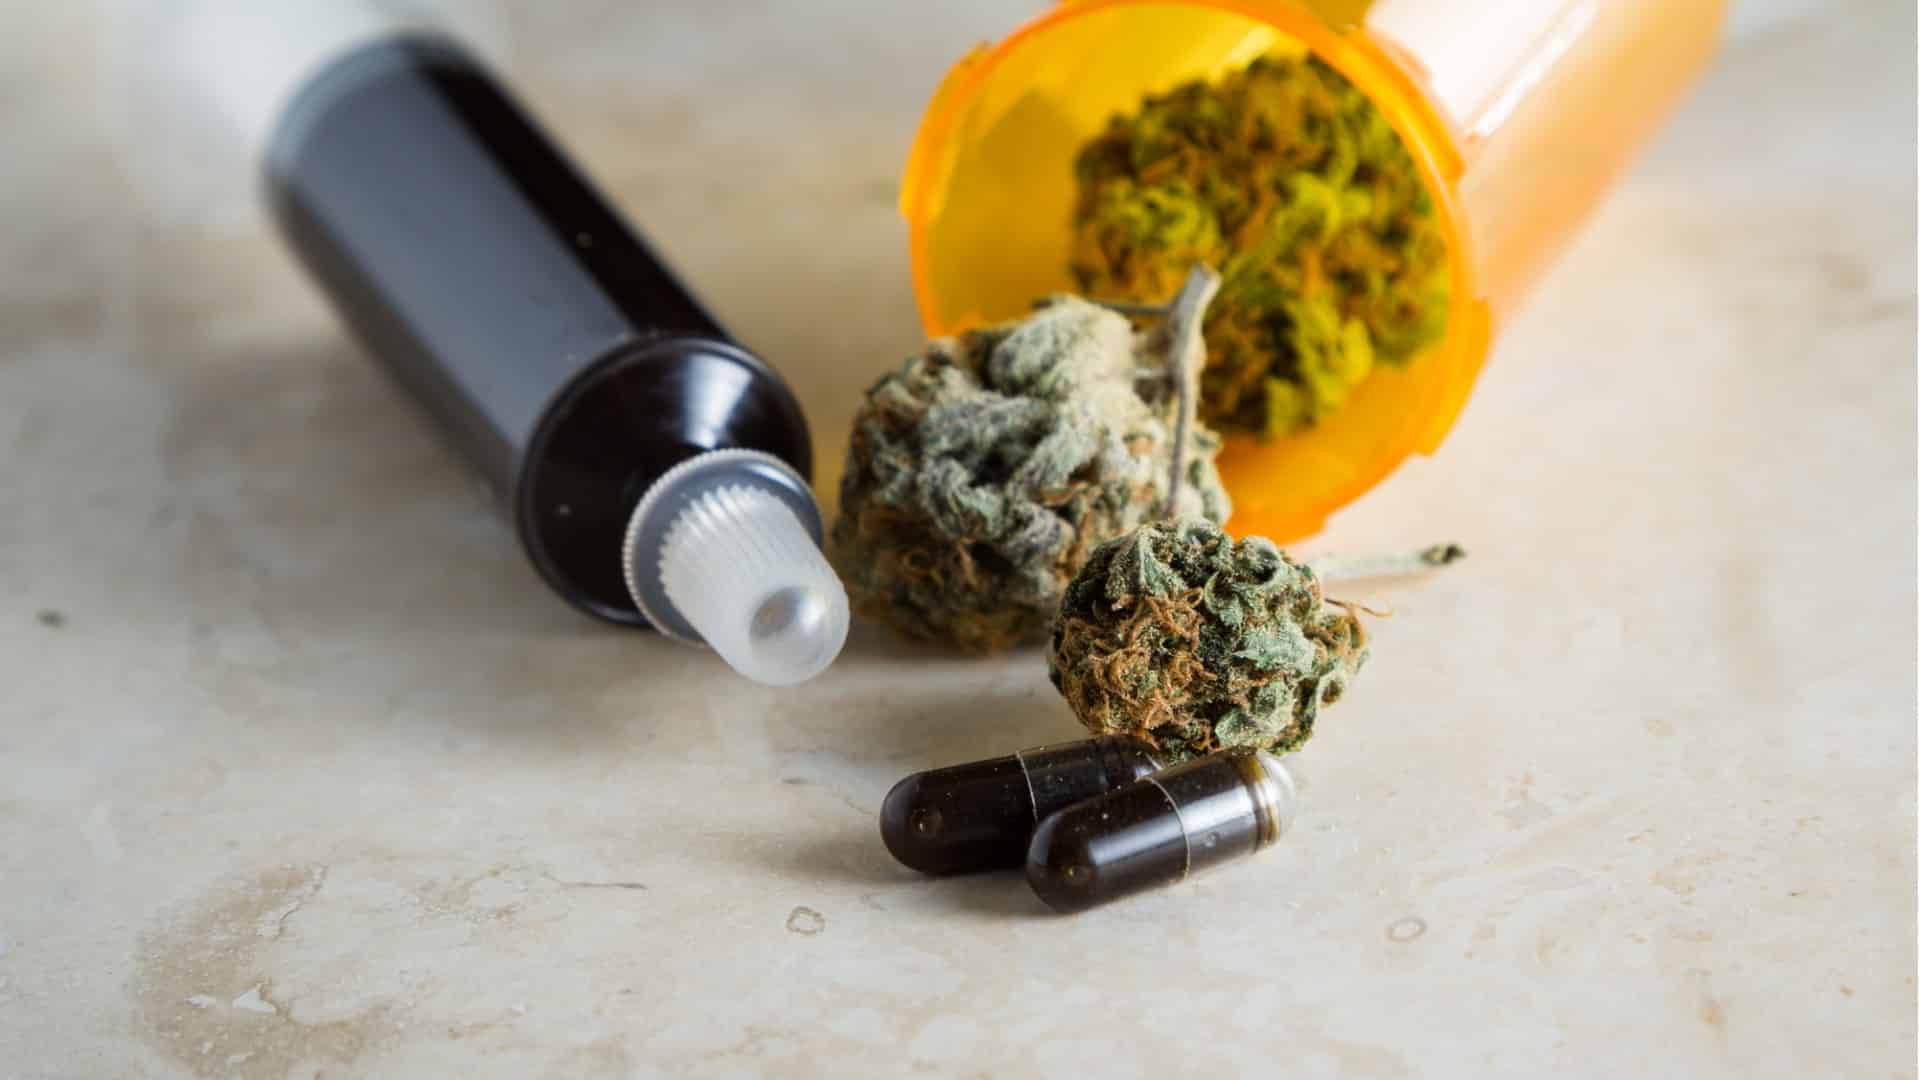 what exactly are cannabinoids actually in mississauga